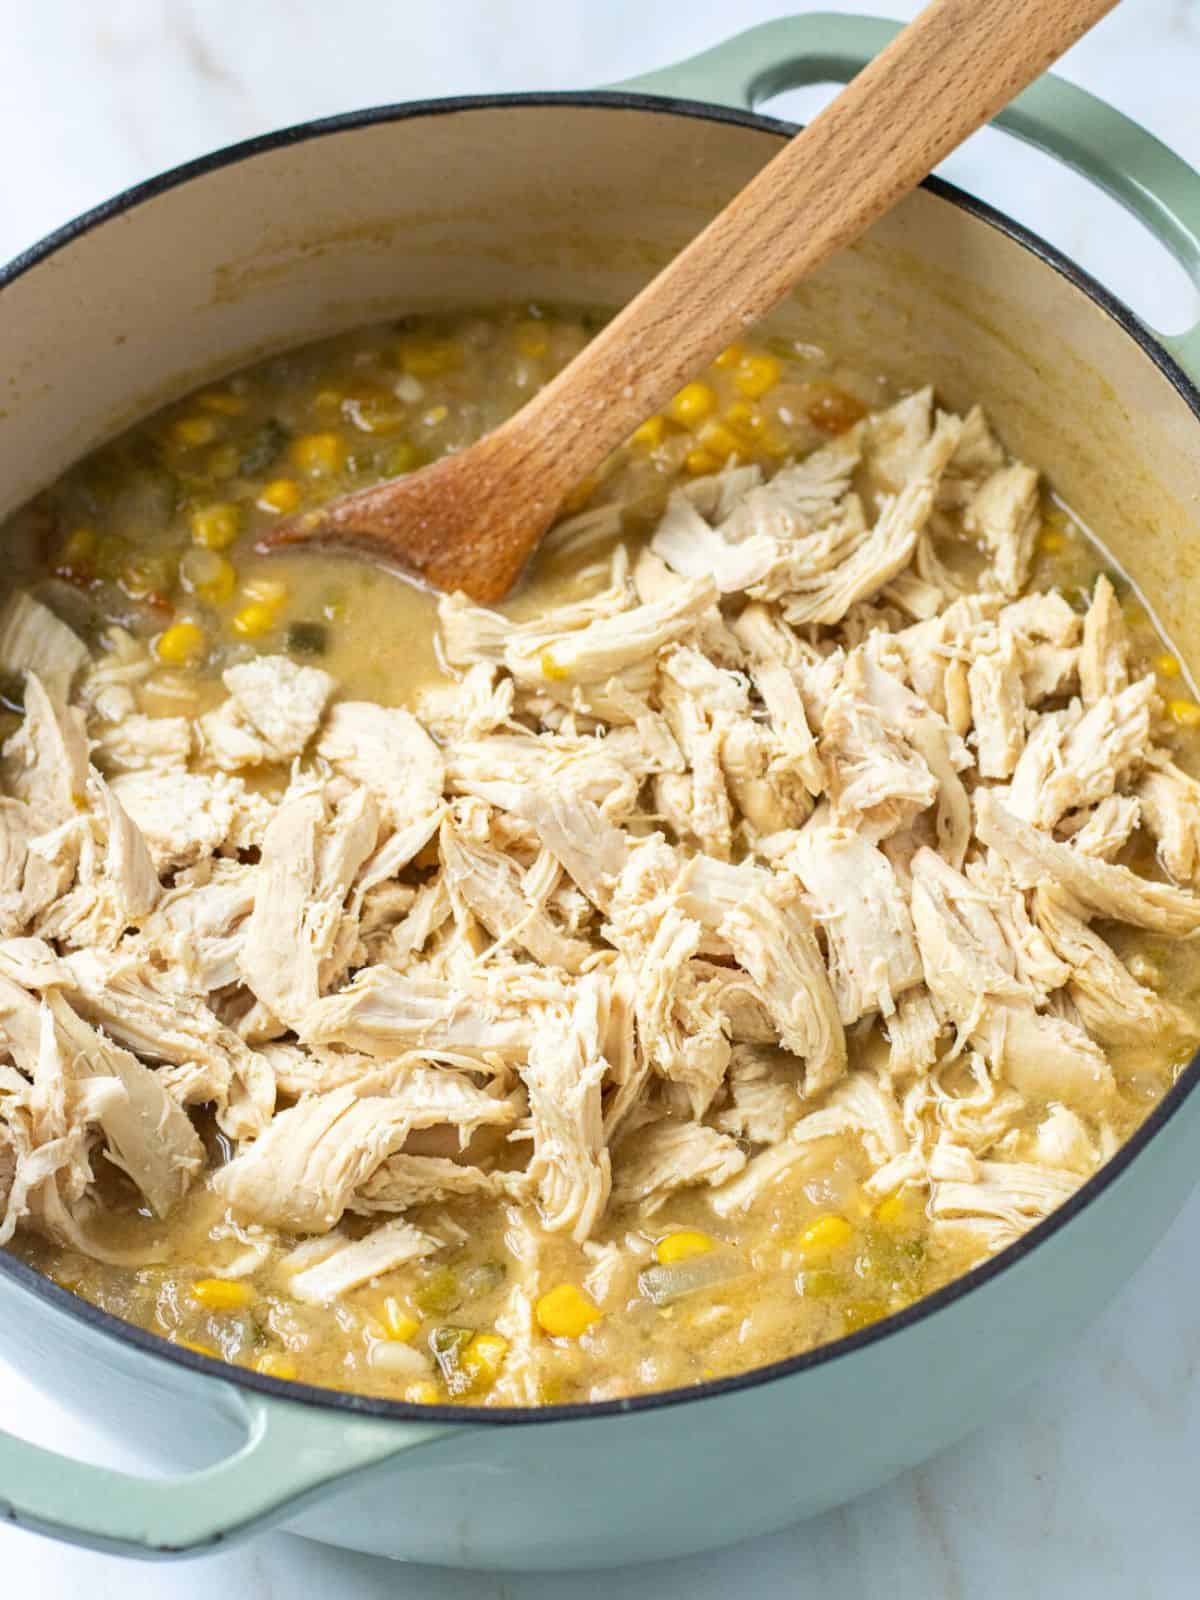 Shredded chicken added back to broth in Dutch oven with a wood spoon.